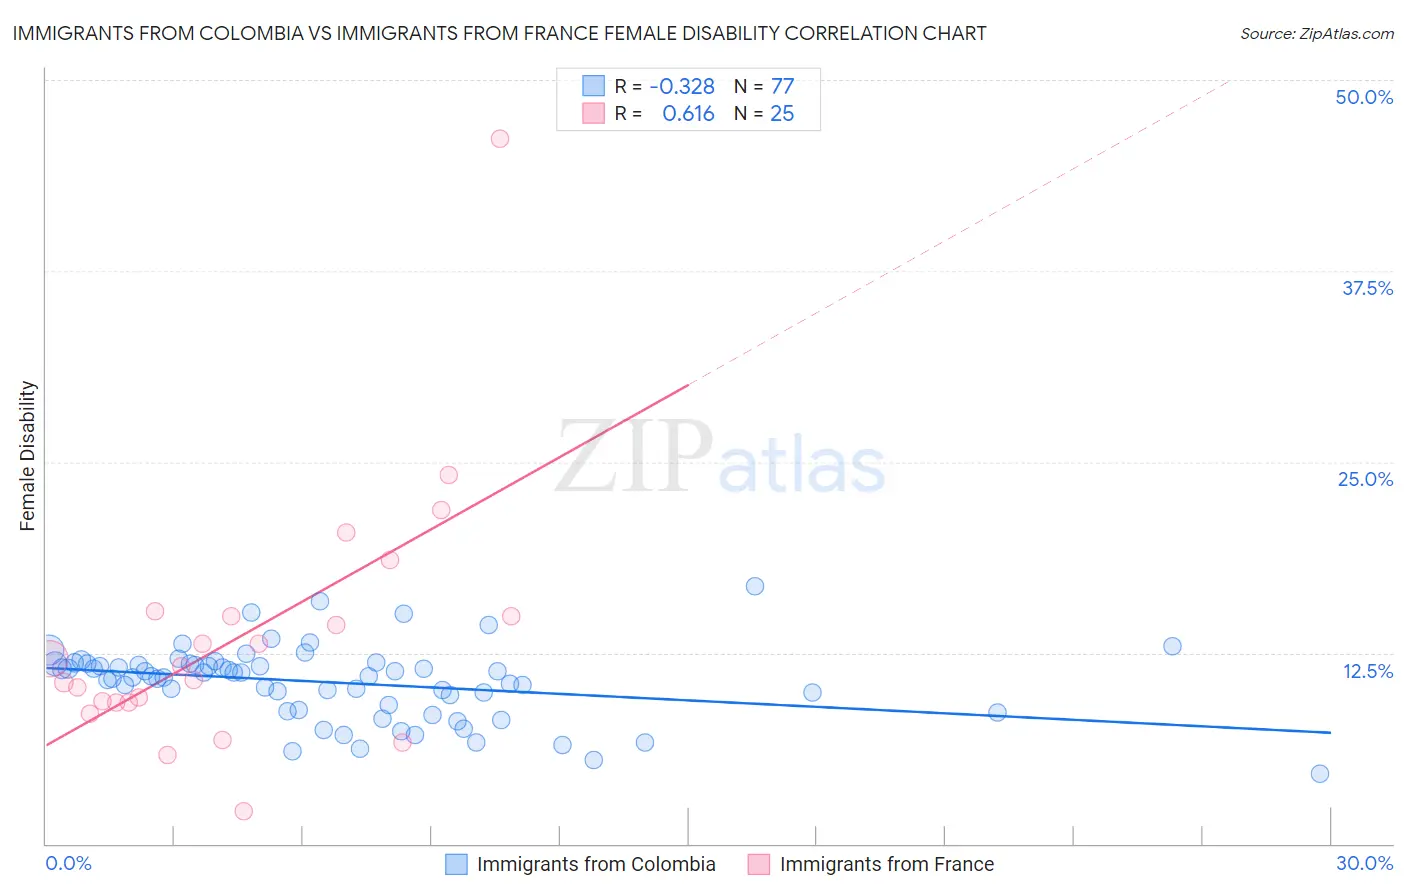 Immigrants from Colombia vs Immigrants from France Female Disability